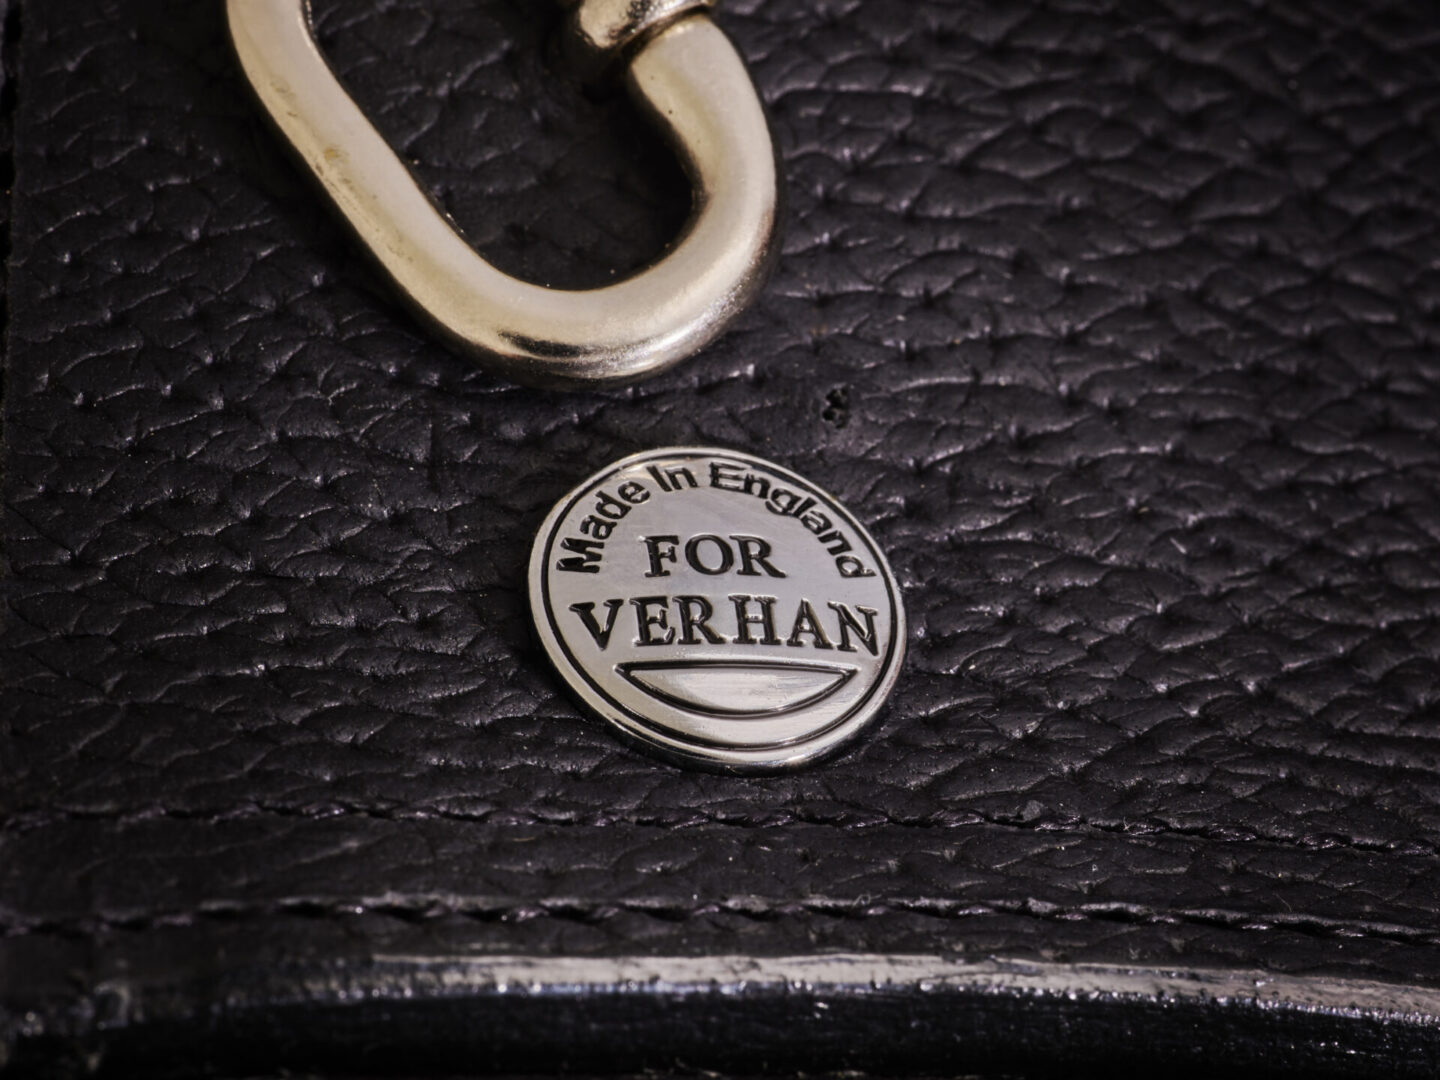 A close up of the back of a purse with a key chain attached.